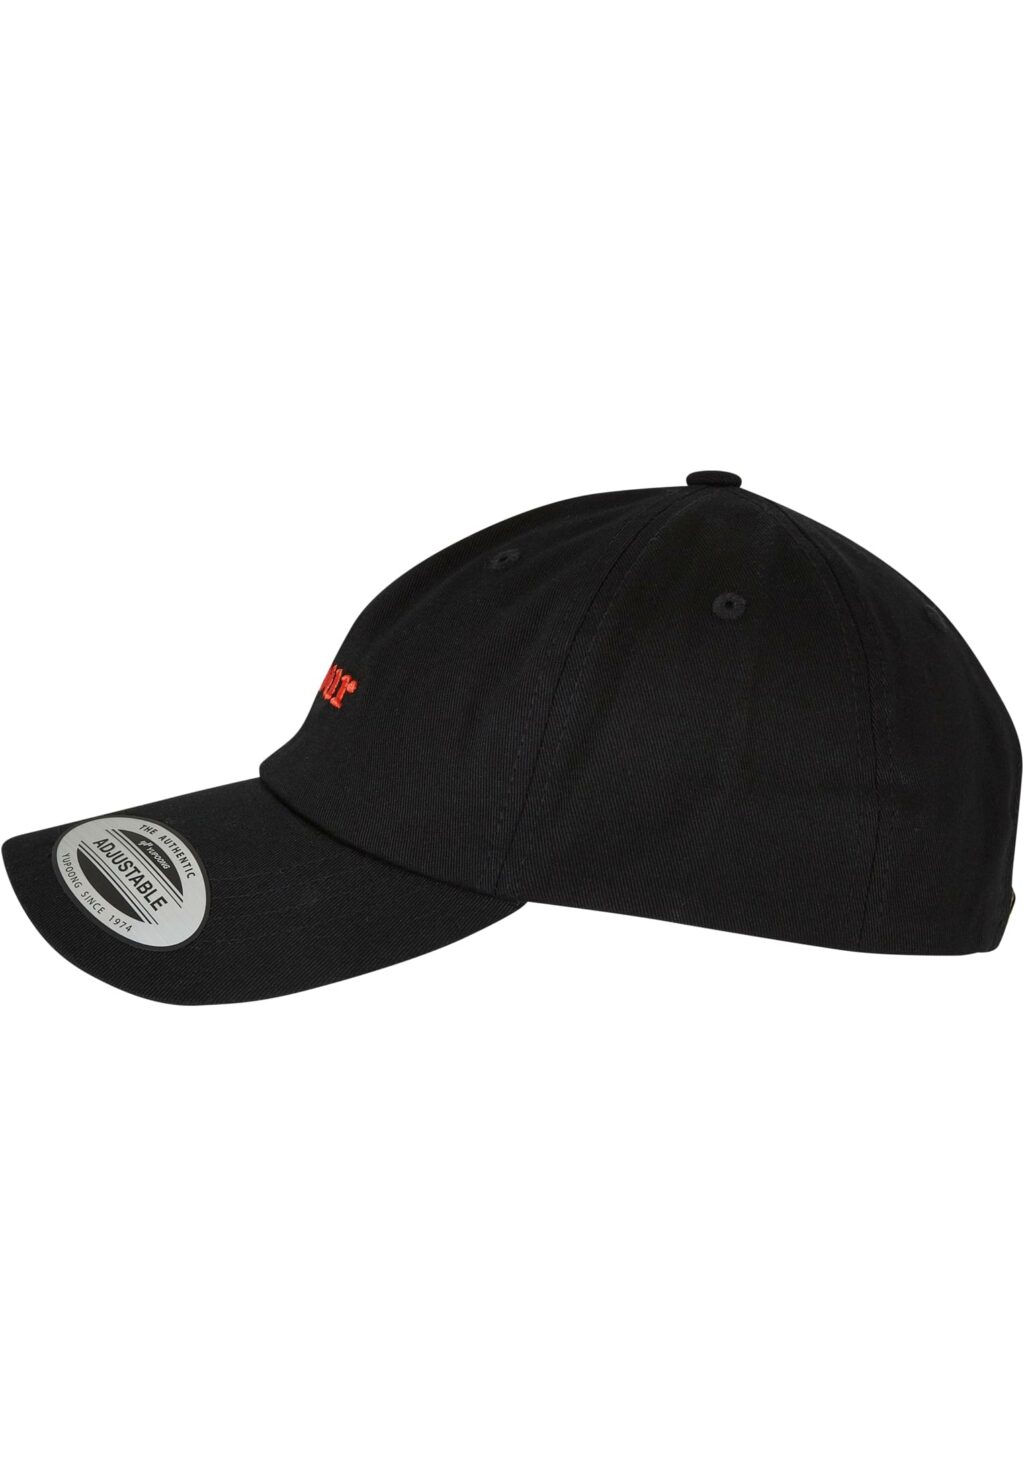 Amour Cap black one BE069